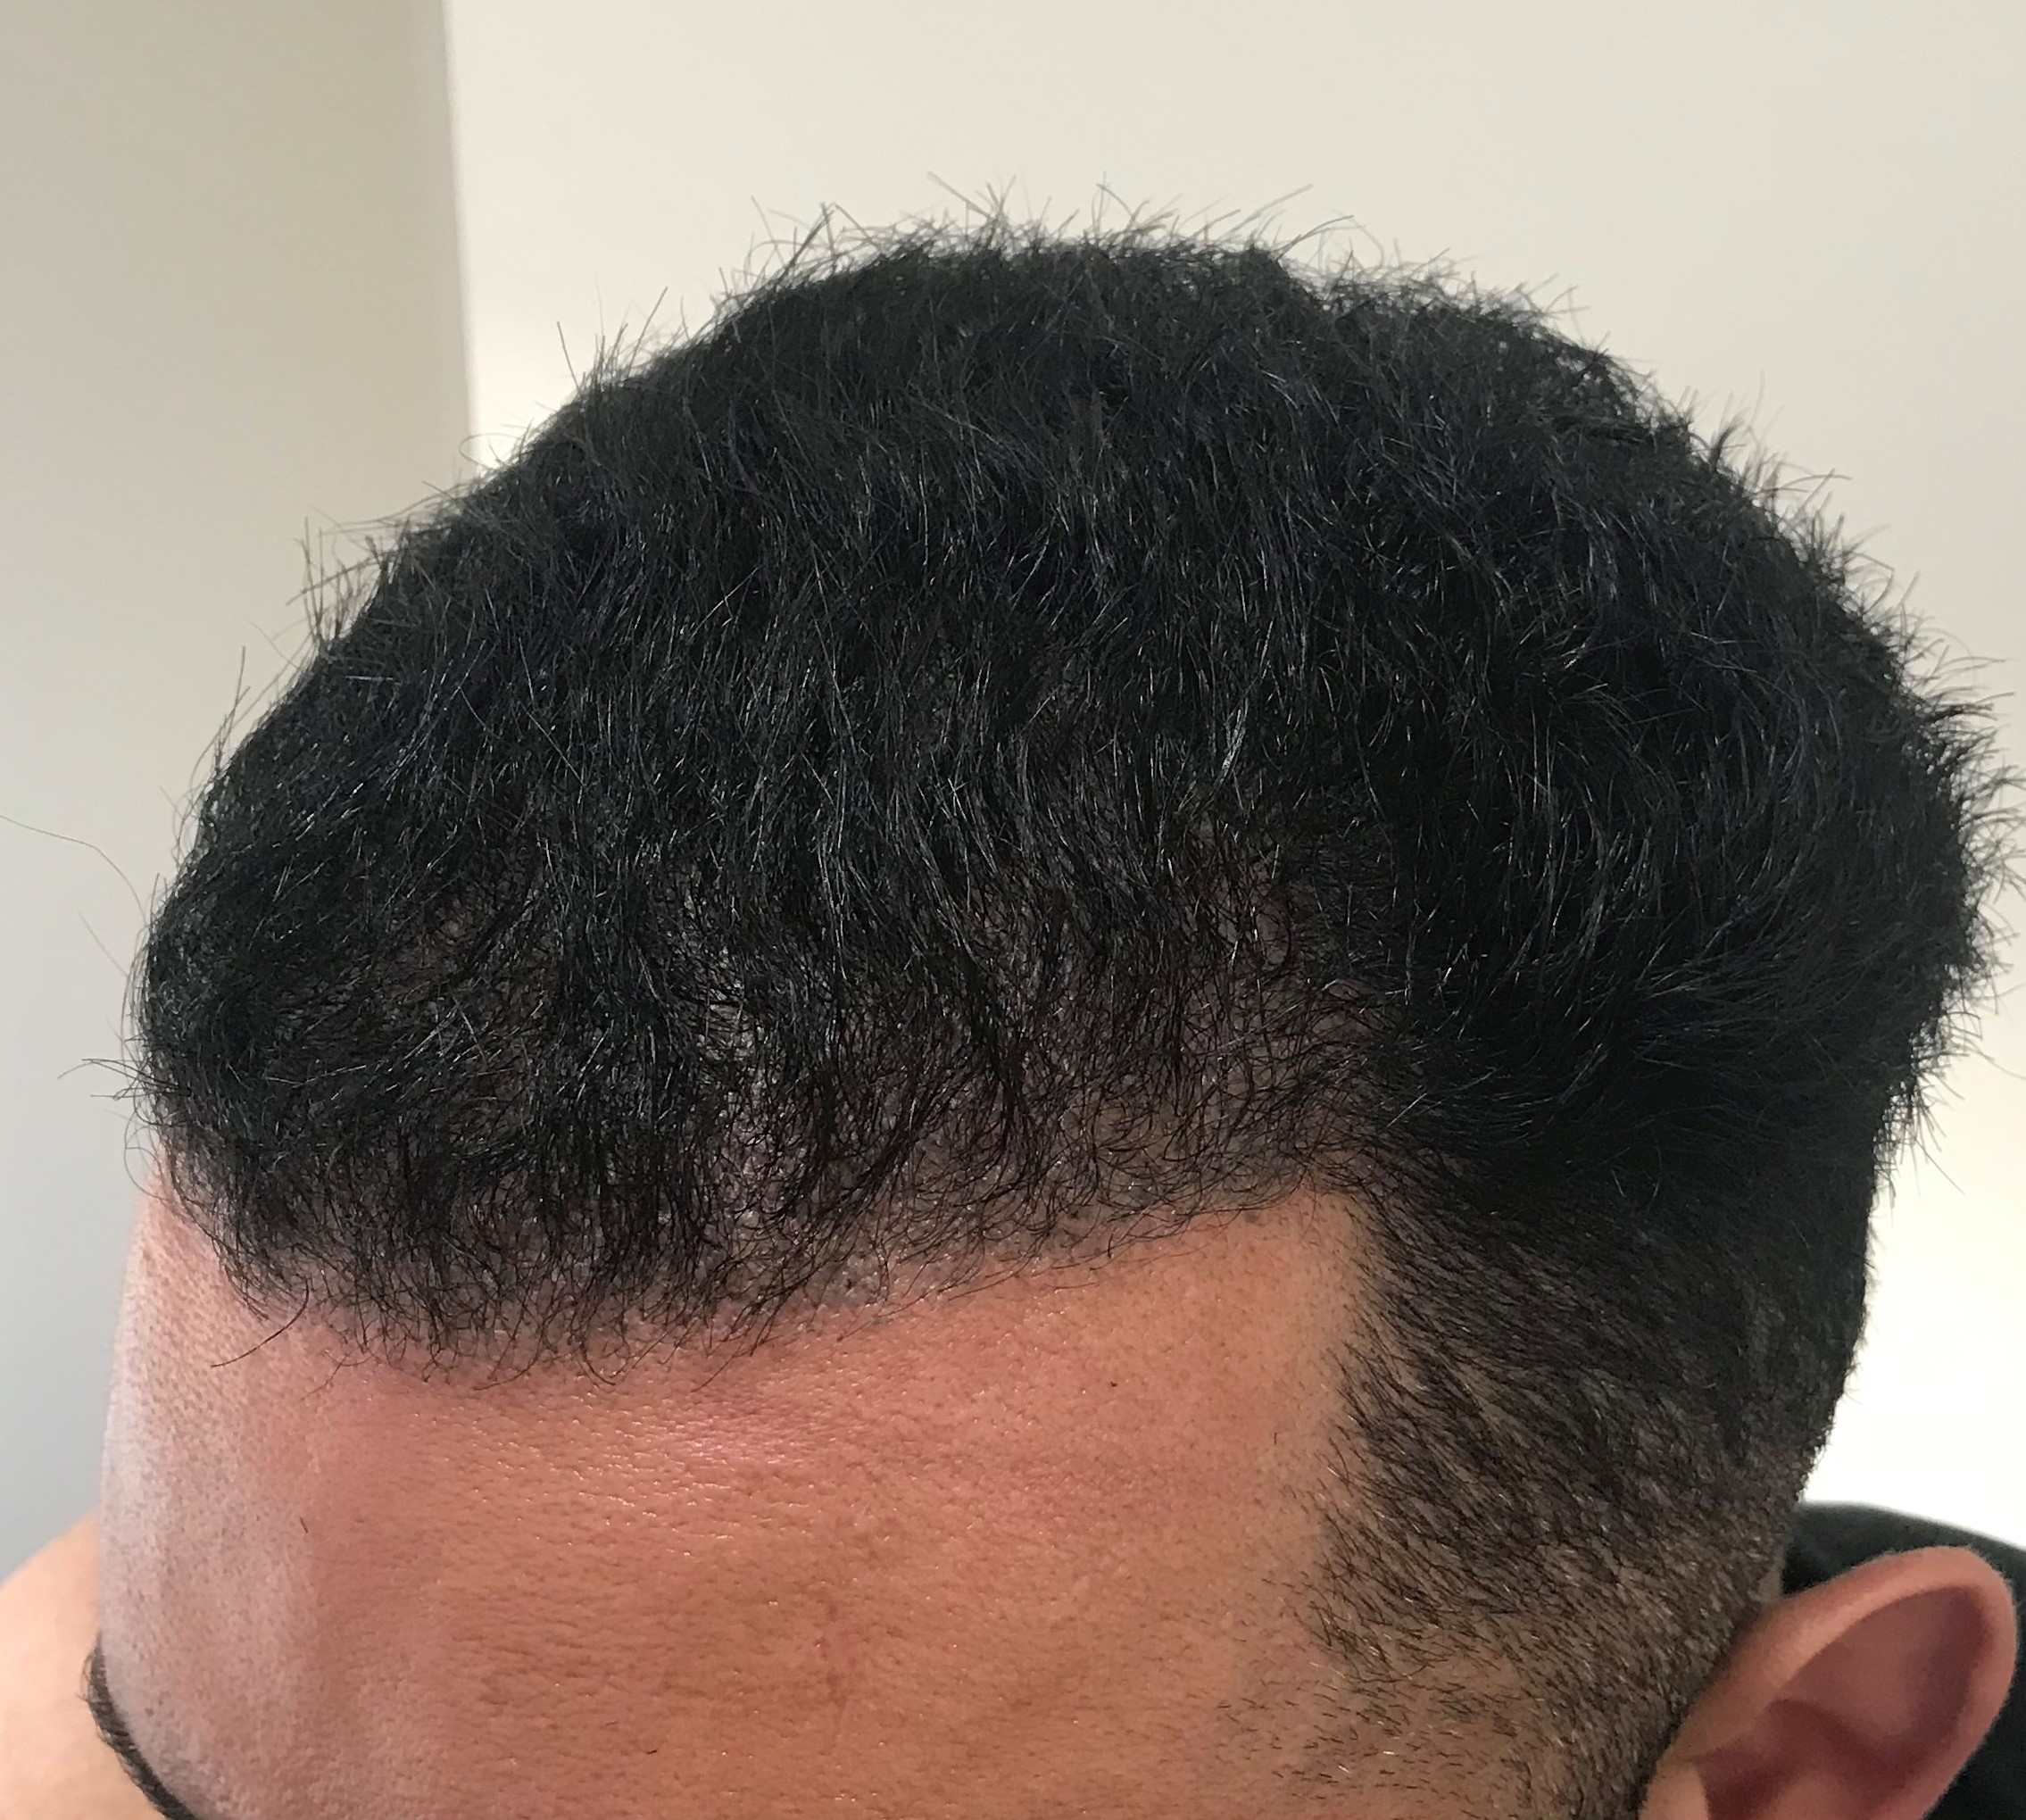 Afro hair transplant Westminster clinic